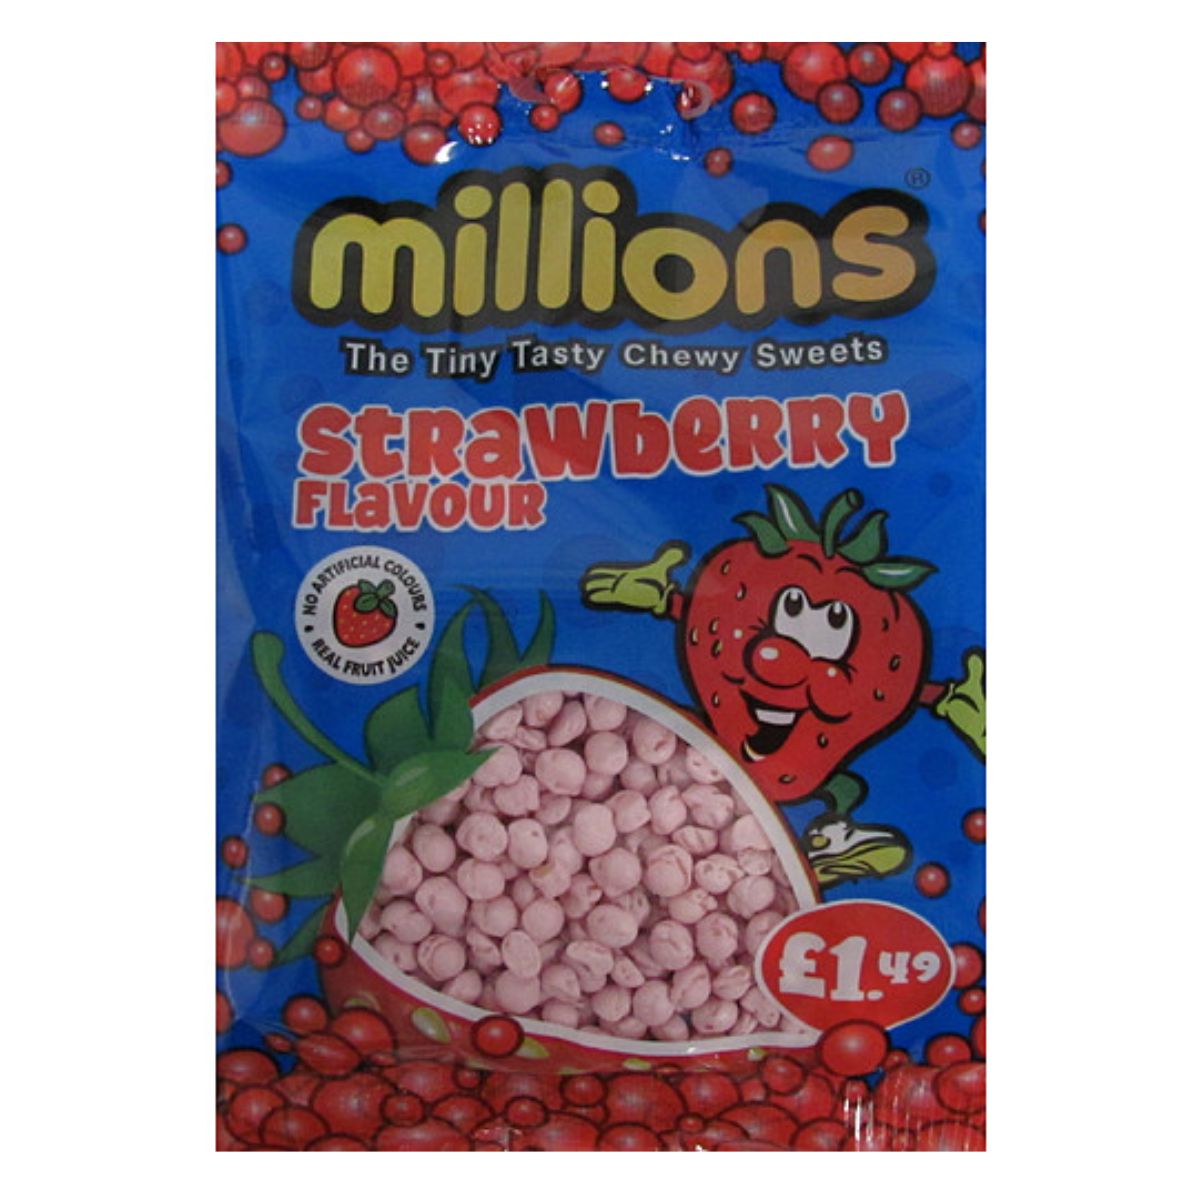 A package of Millions - Strawberry - 110g chewy candies with the price of £1.49 displayed.